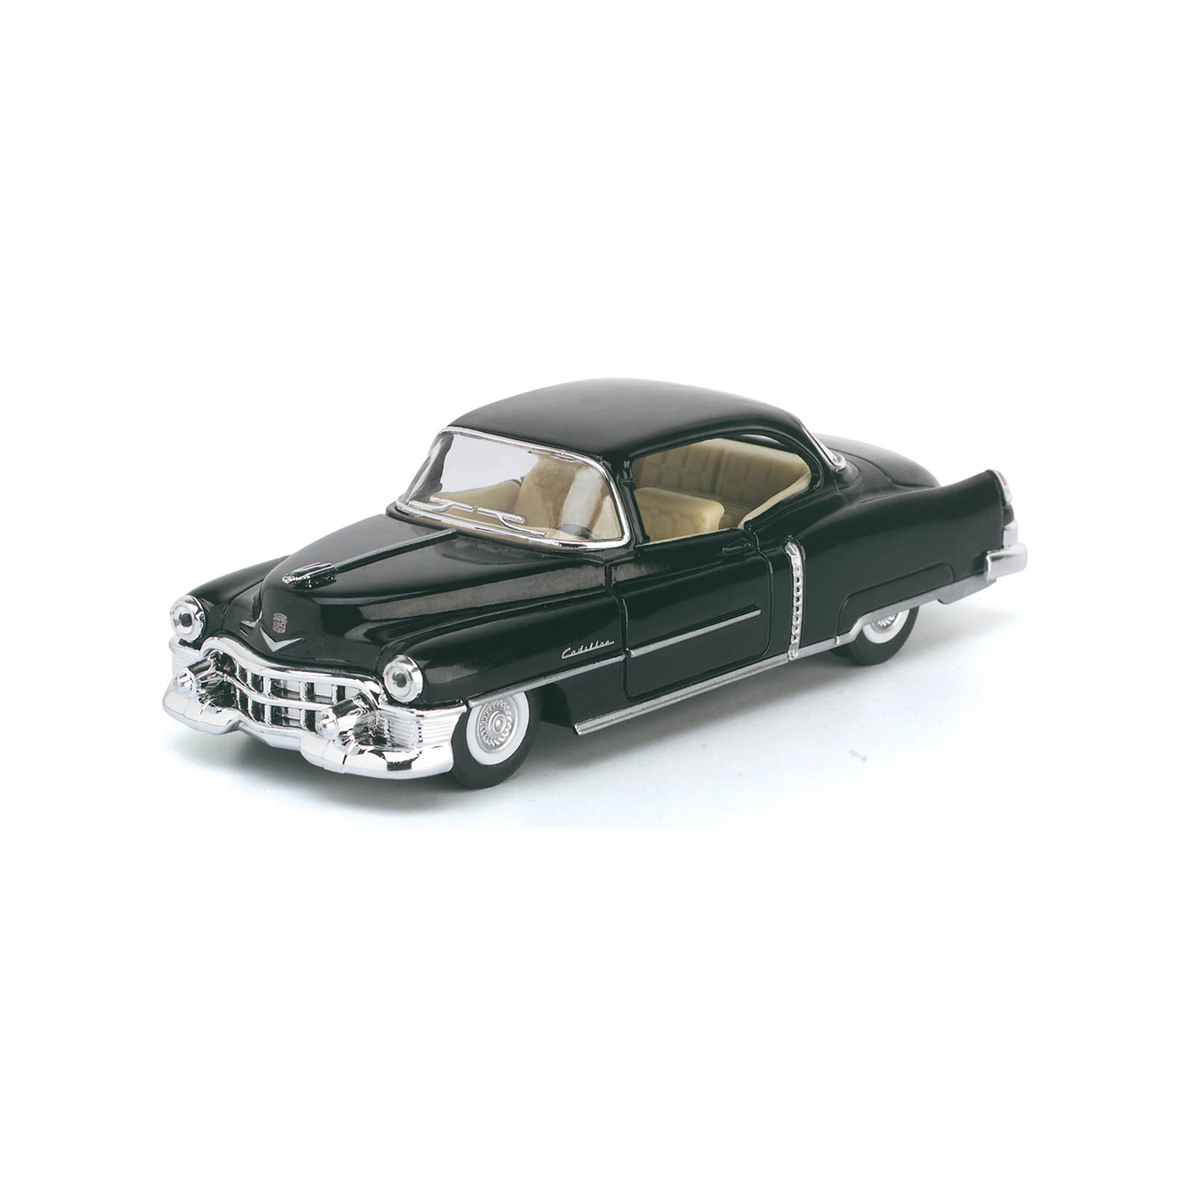 Kinsmart 1953 Cadillac Series 62 Coupe KT5339D